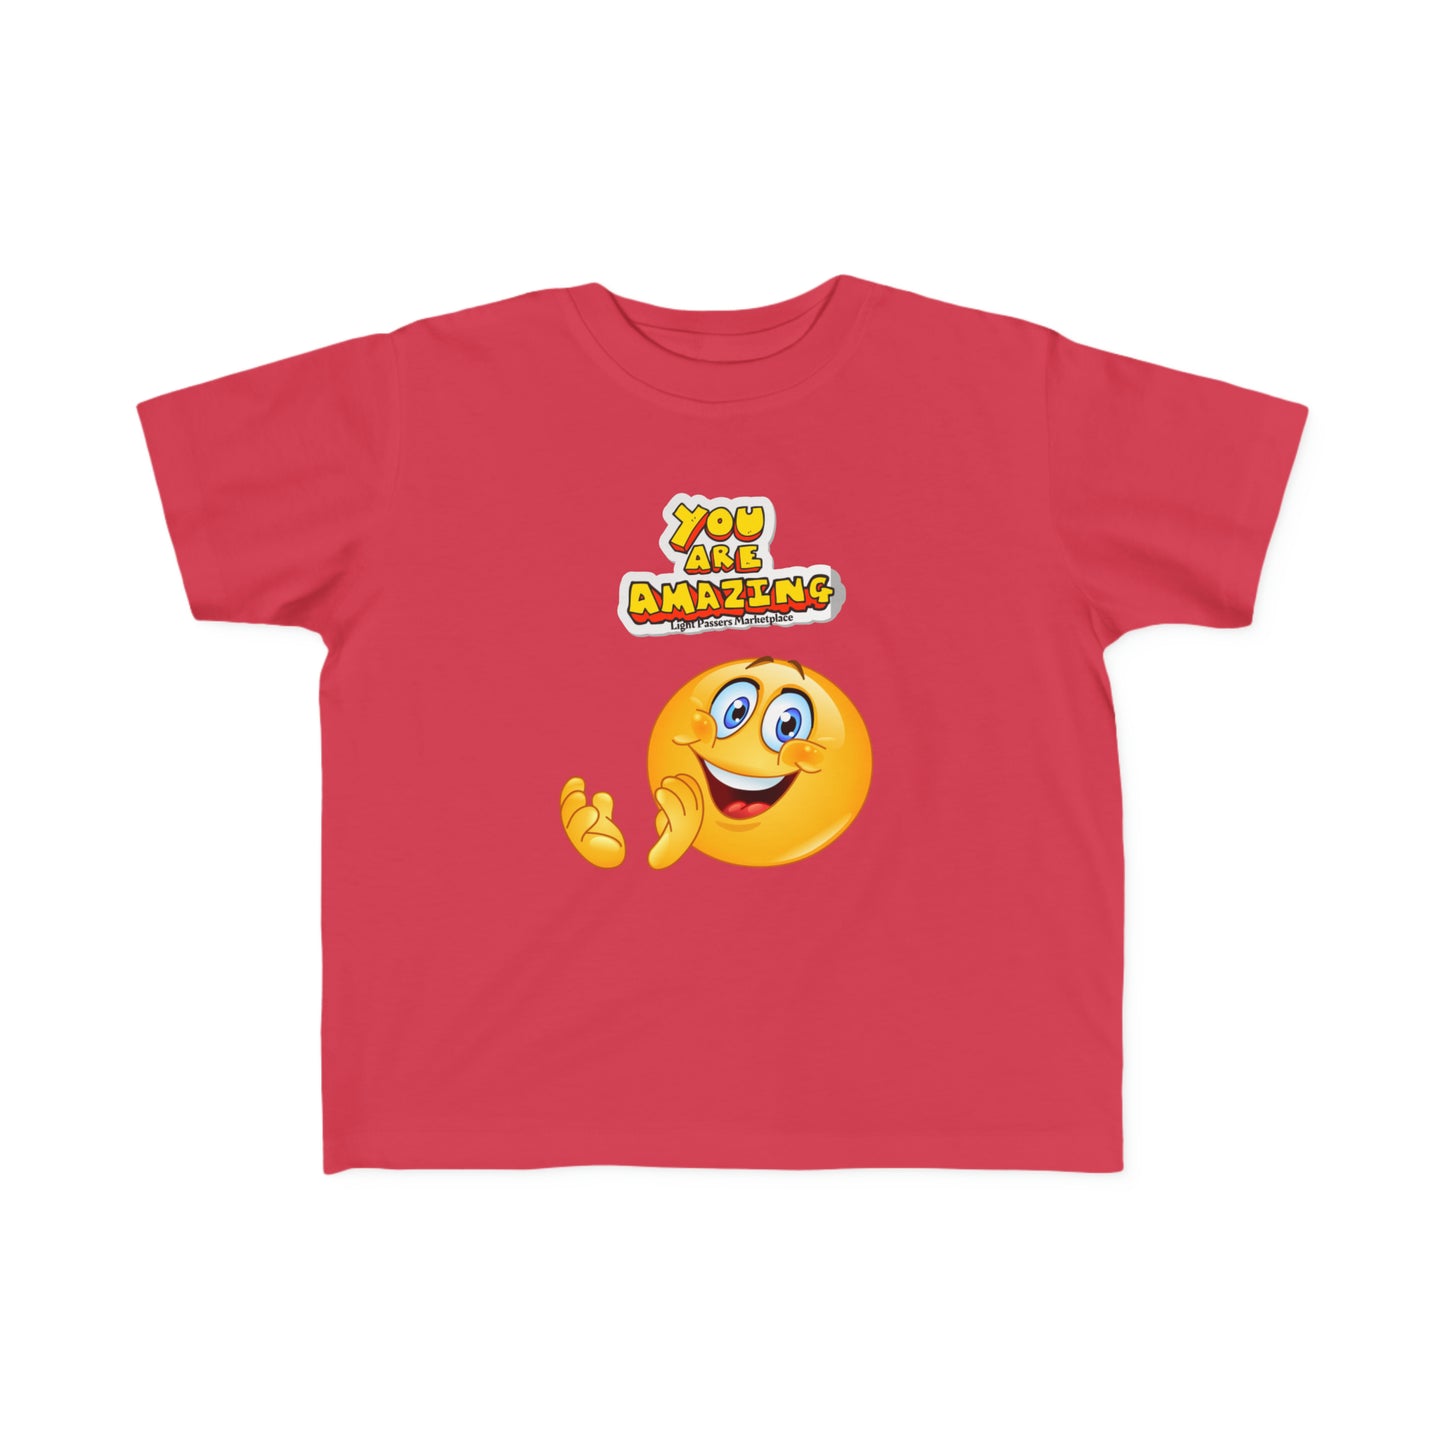 A toddler's red tee featuring a cartoon face, embodying the You are Amazing Toddler T-shirt. Soft 100% combed cotton, durable print, tear-away label, and a classic fit for comfort.